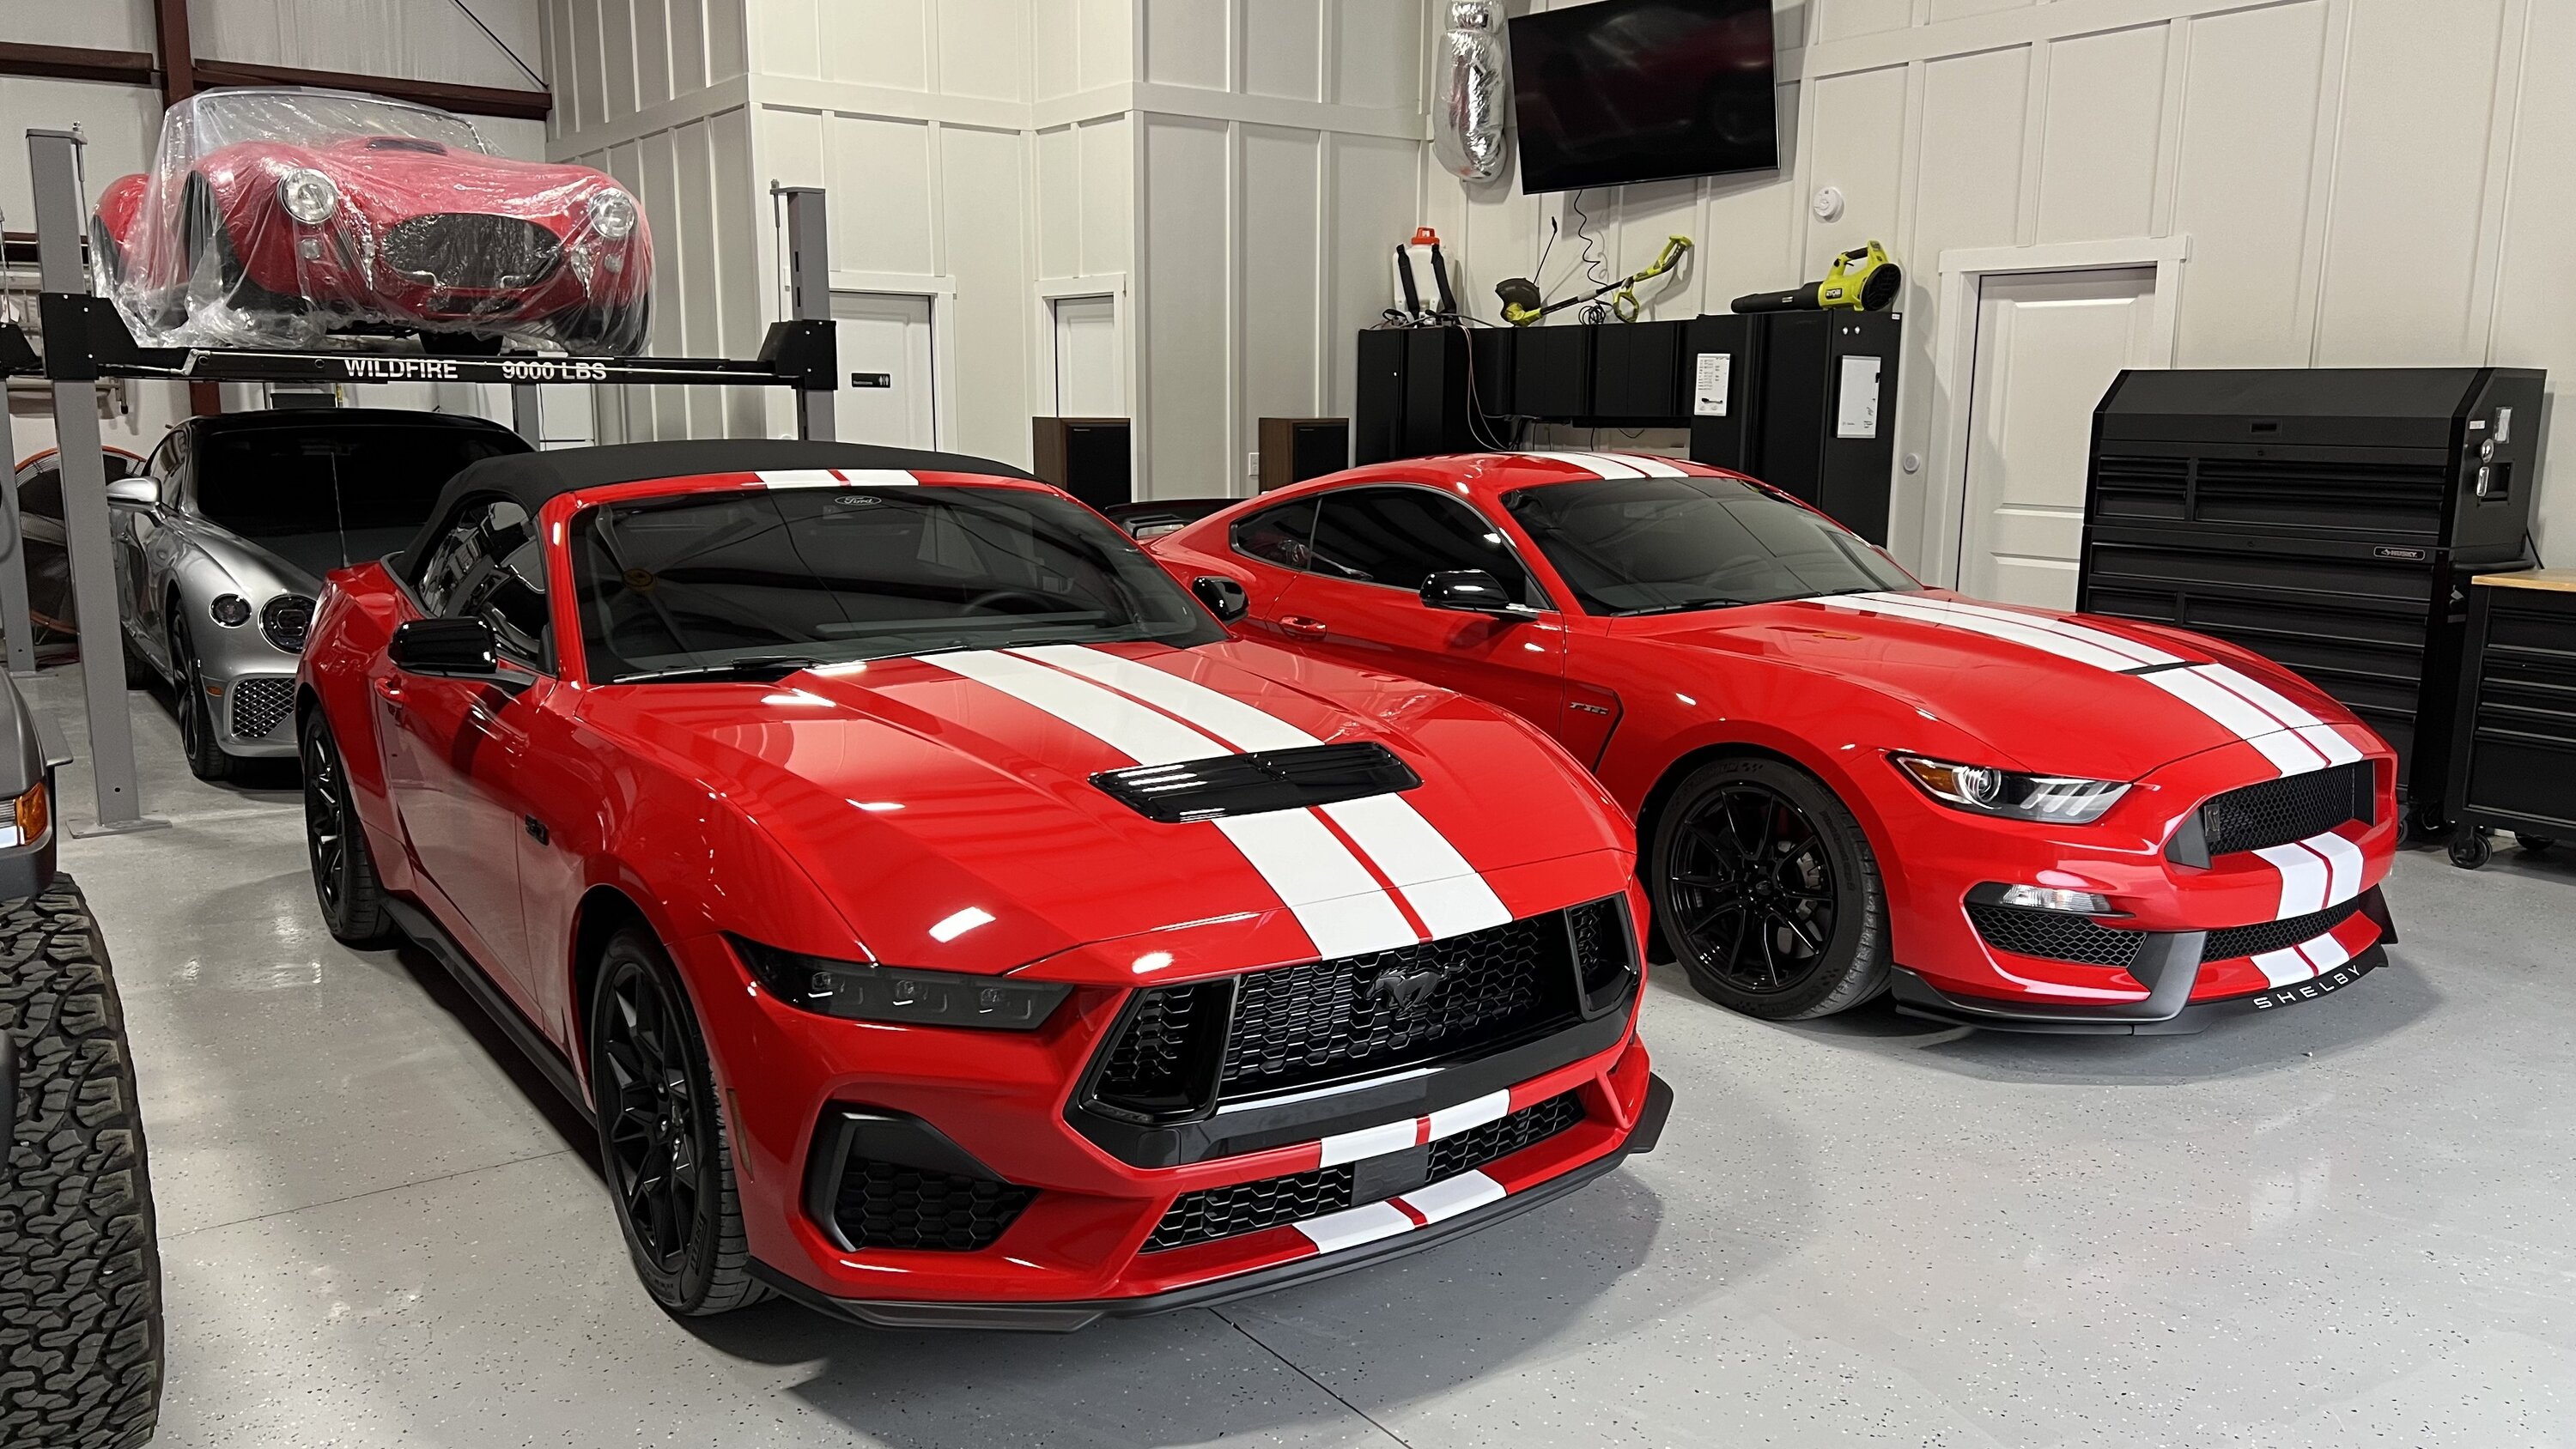 S650 Mustang S650 Red convertible with stripes next to GT350 IMG_9429